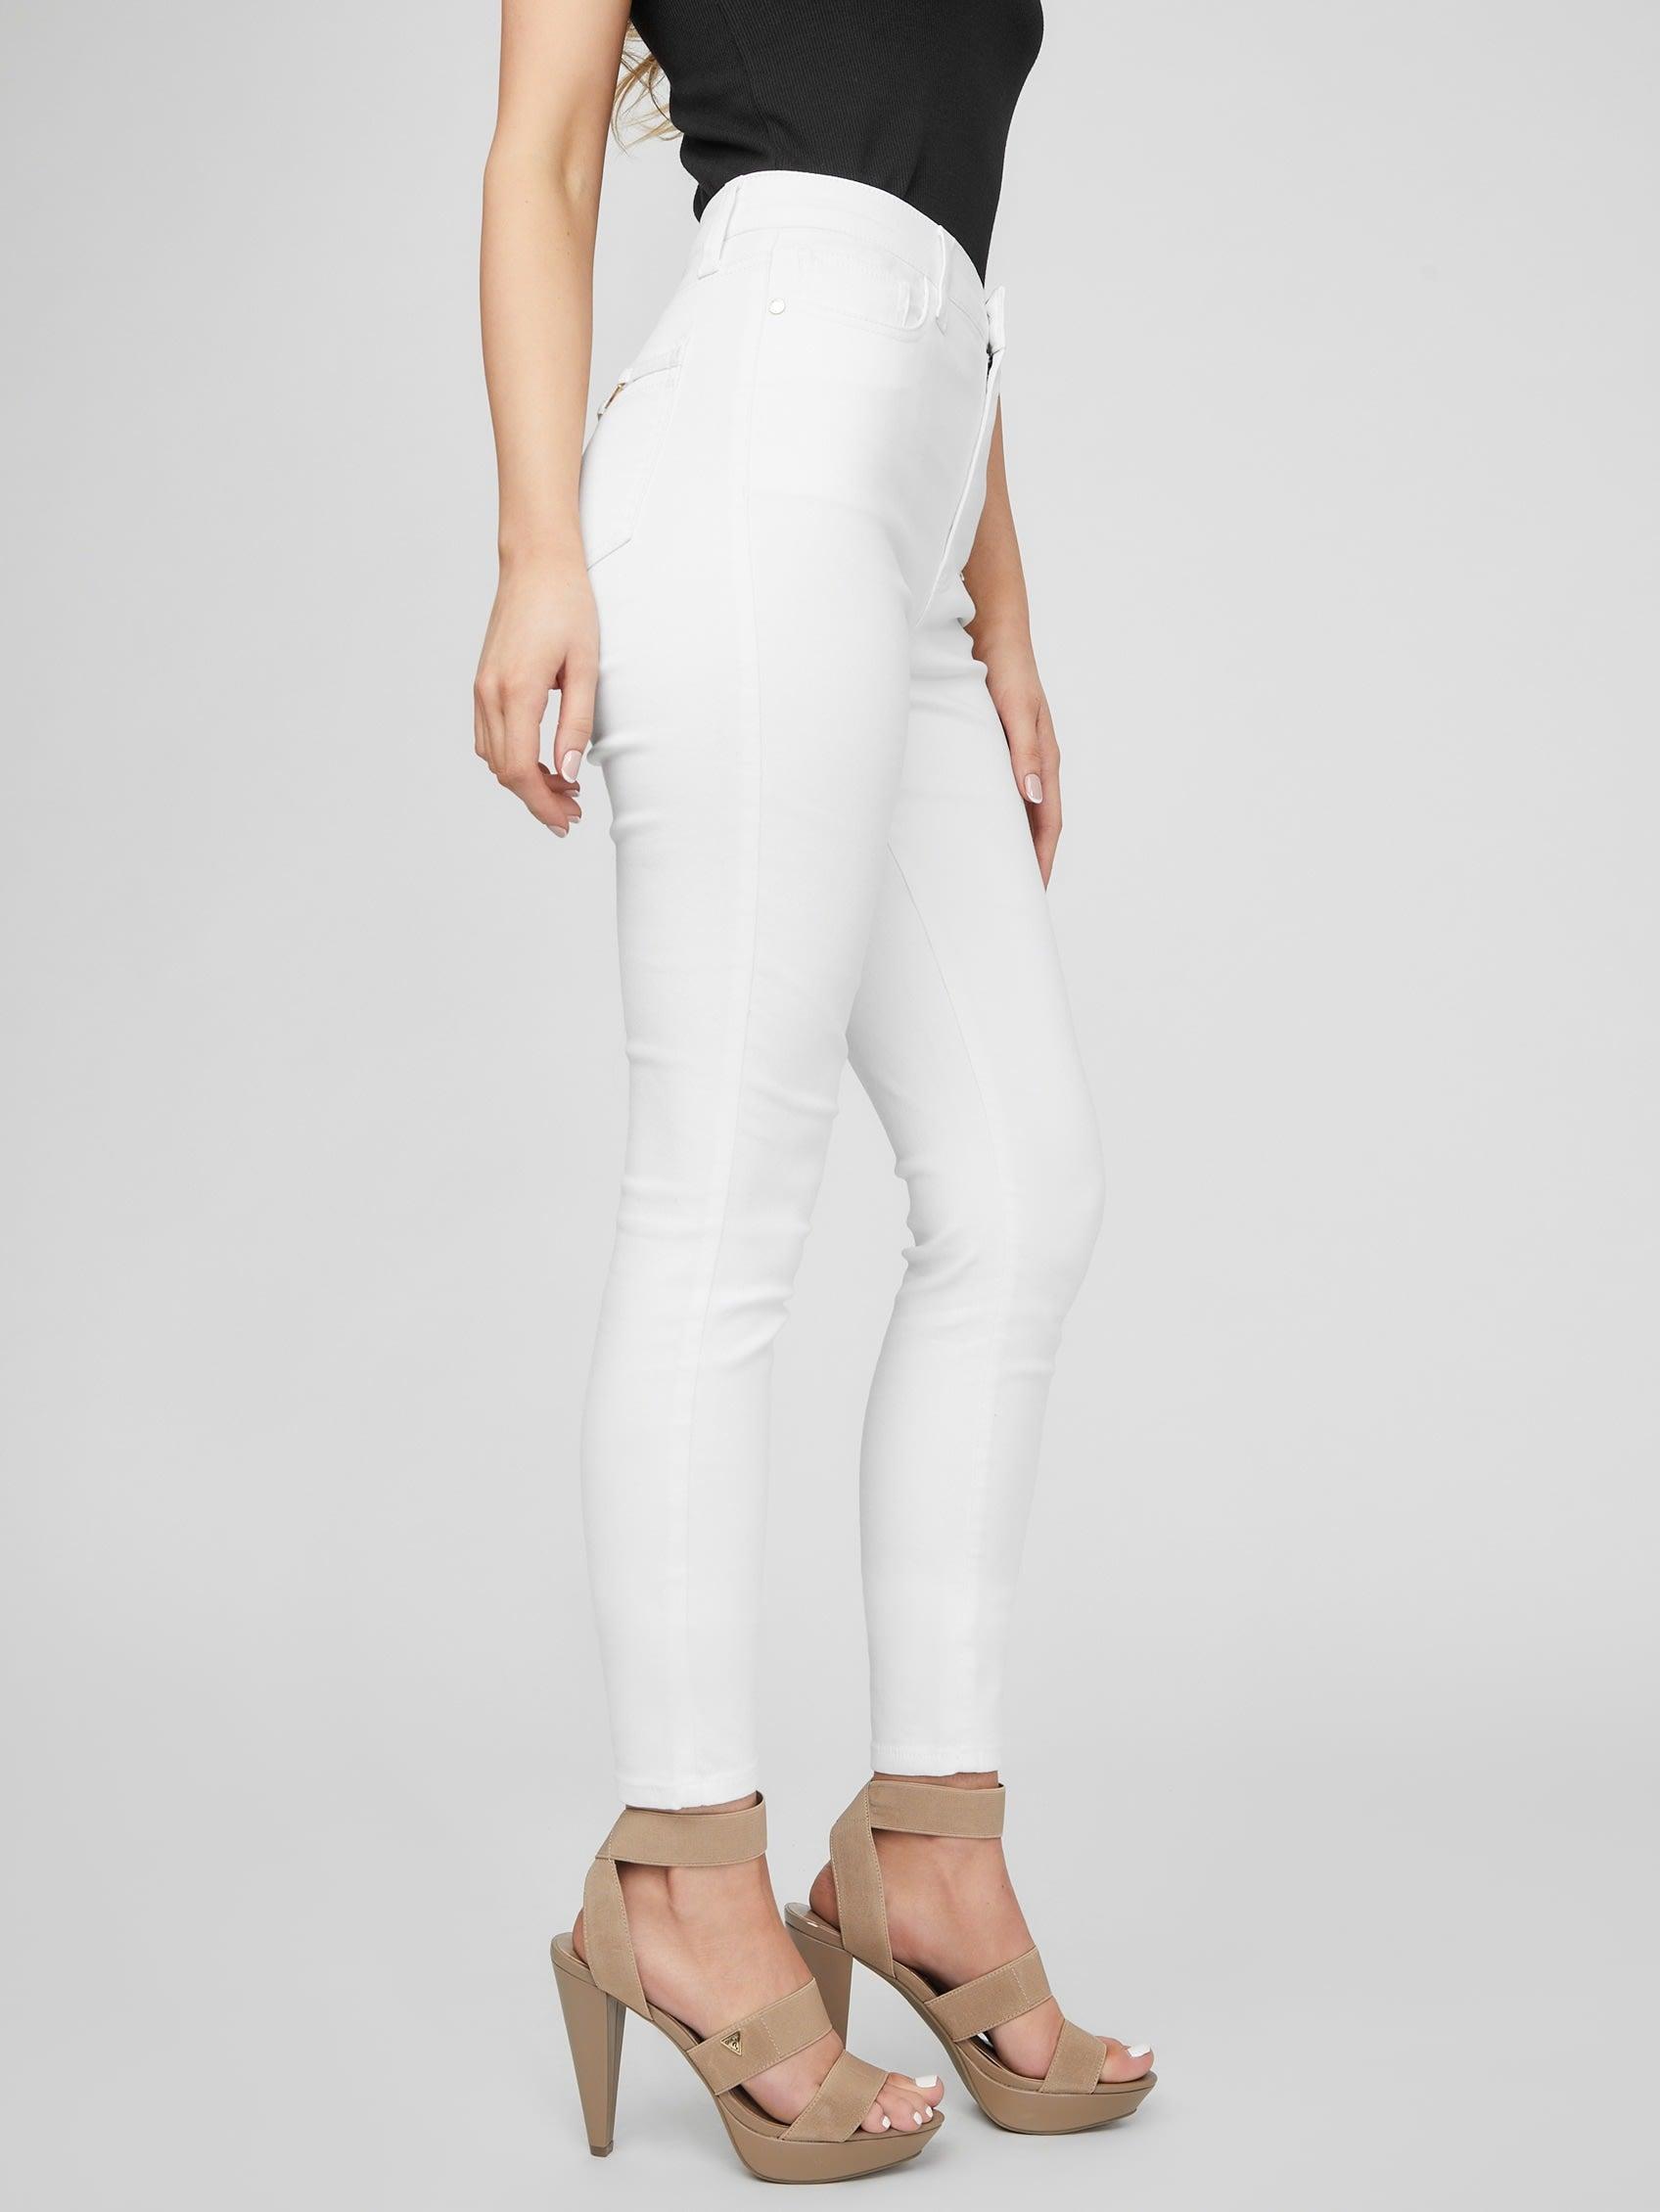 Guess Factory Lila High-rise Ankle Skinny Jeans in White | Lyst